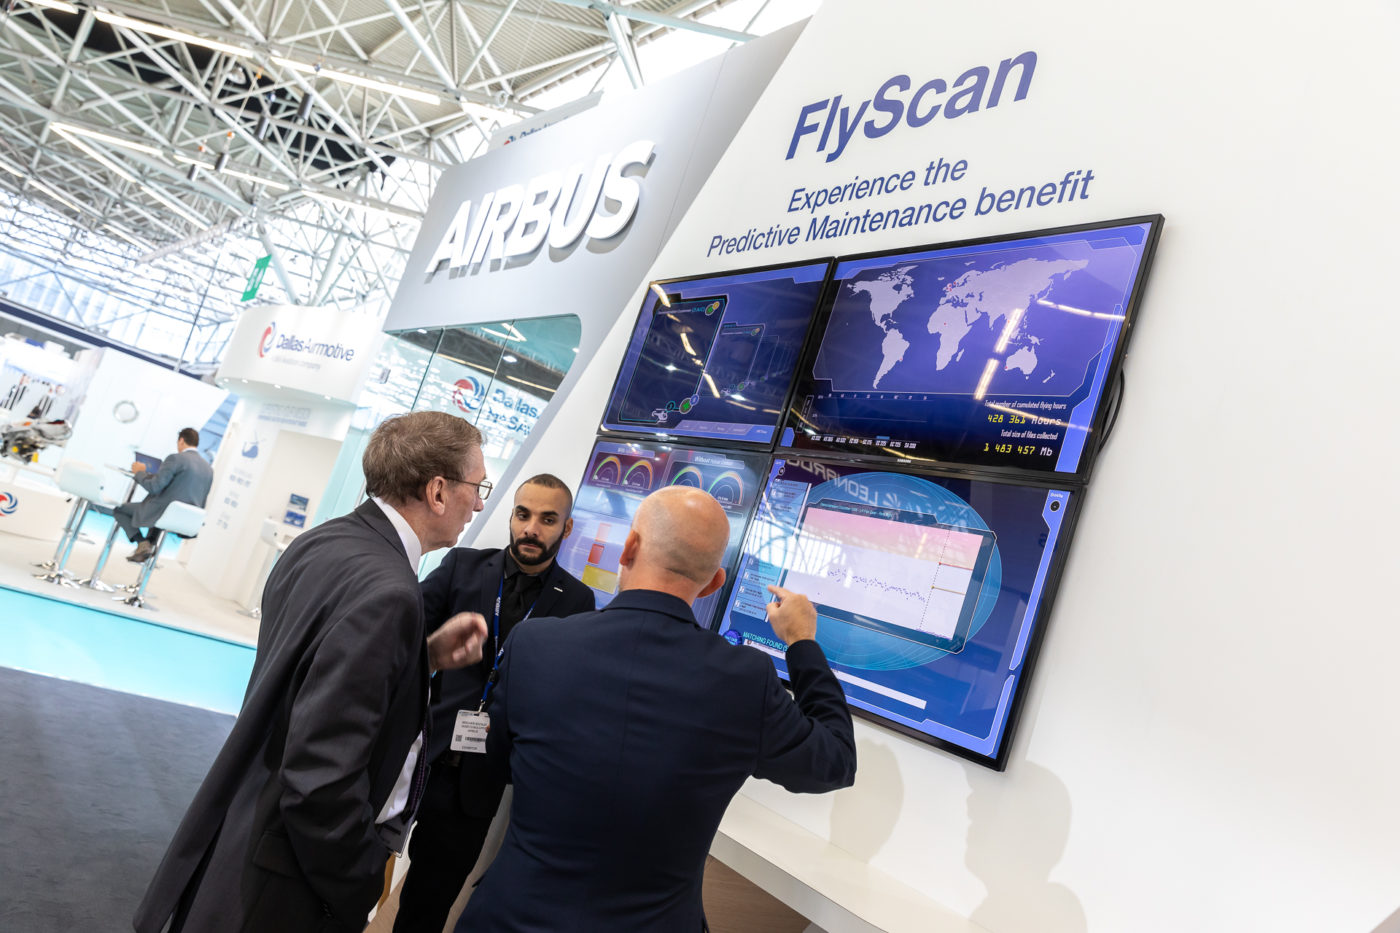 Once connected to FlyScan, customers are given access to a core set of digital and analytics services free of charge, such as fleet activity reports. Lorette Fabre Photo